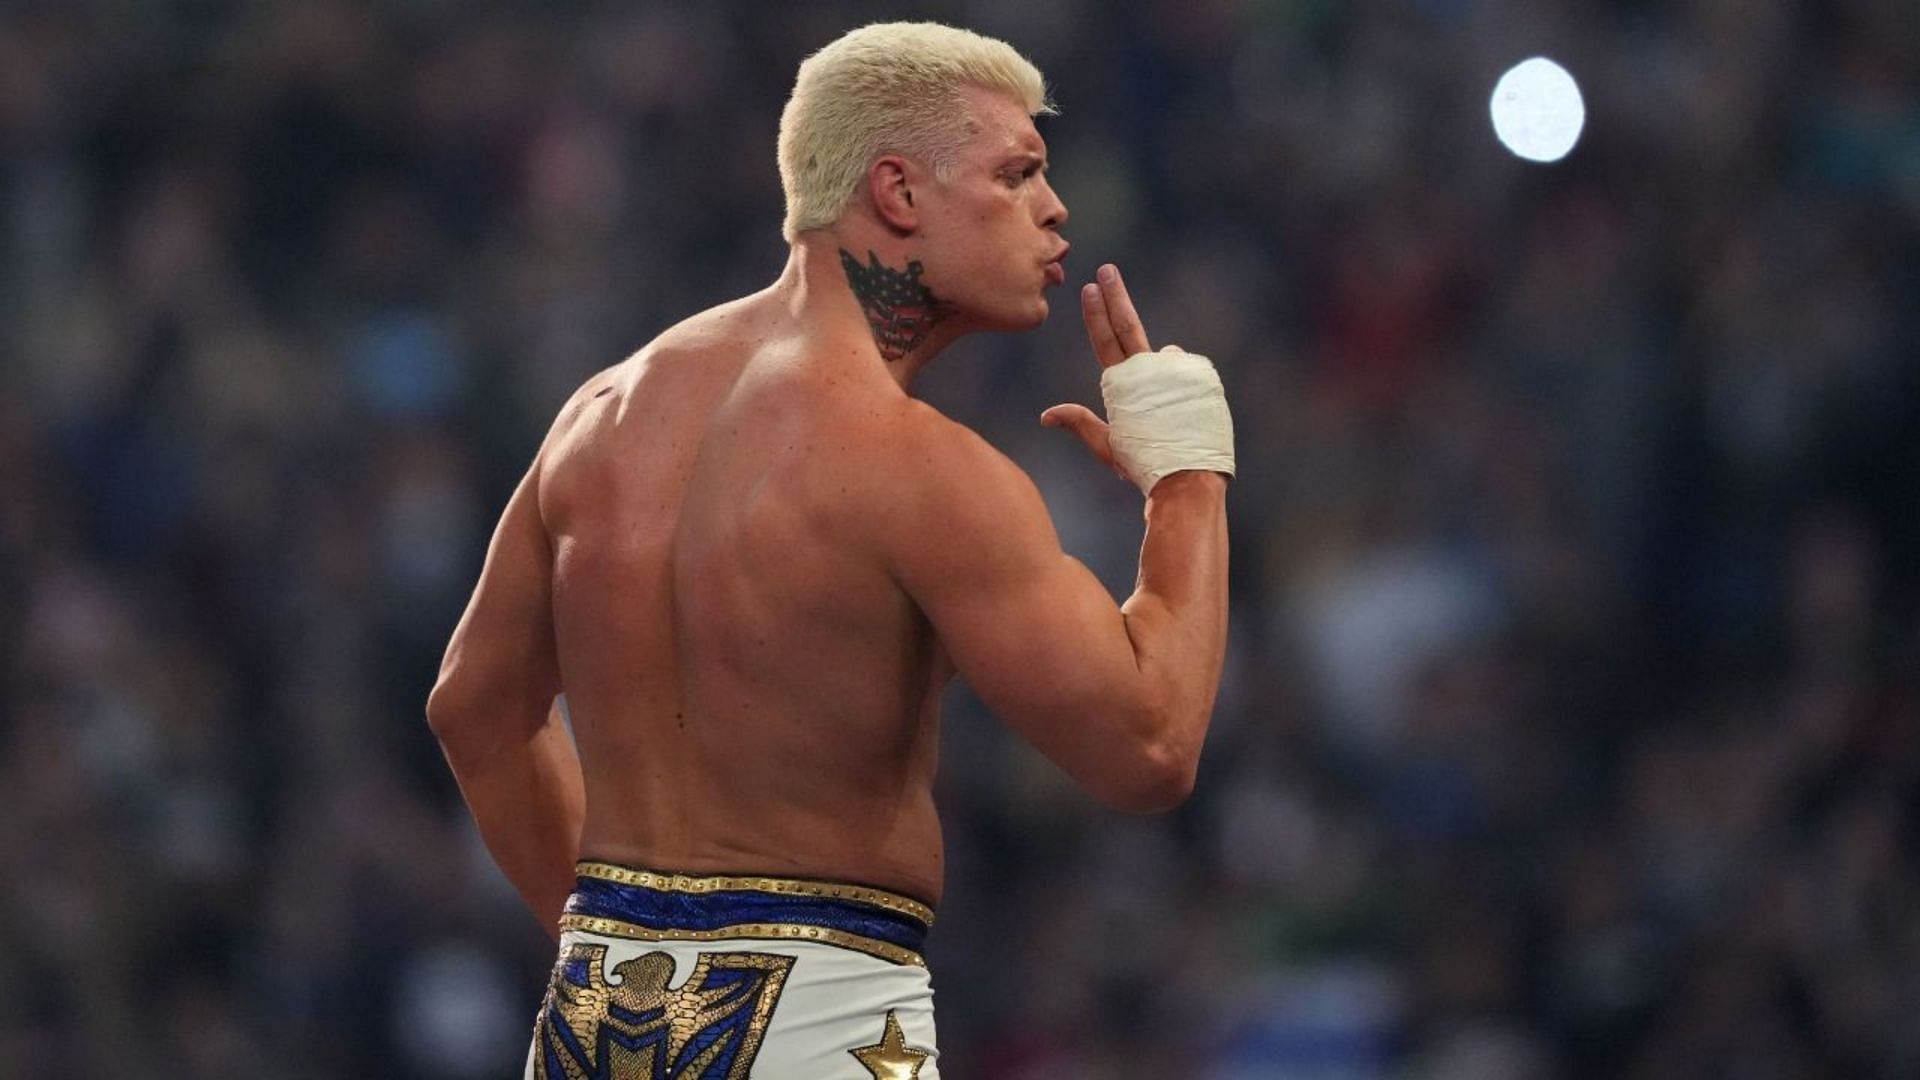 Cody Rhodes pops his eardrums at WWE Royal Rumble